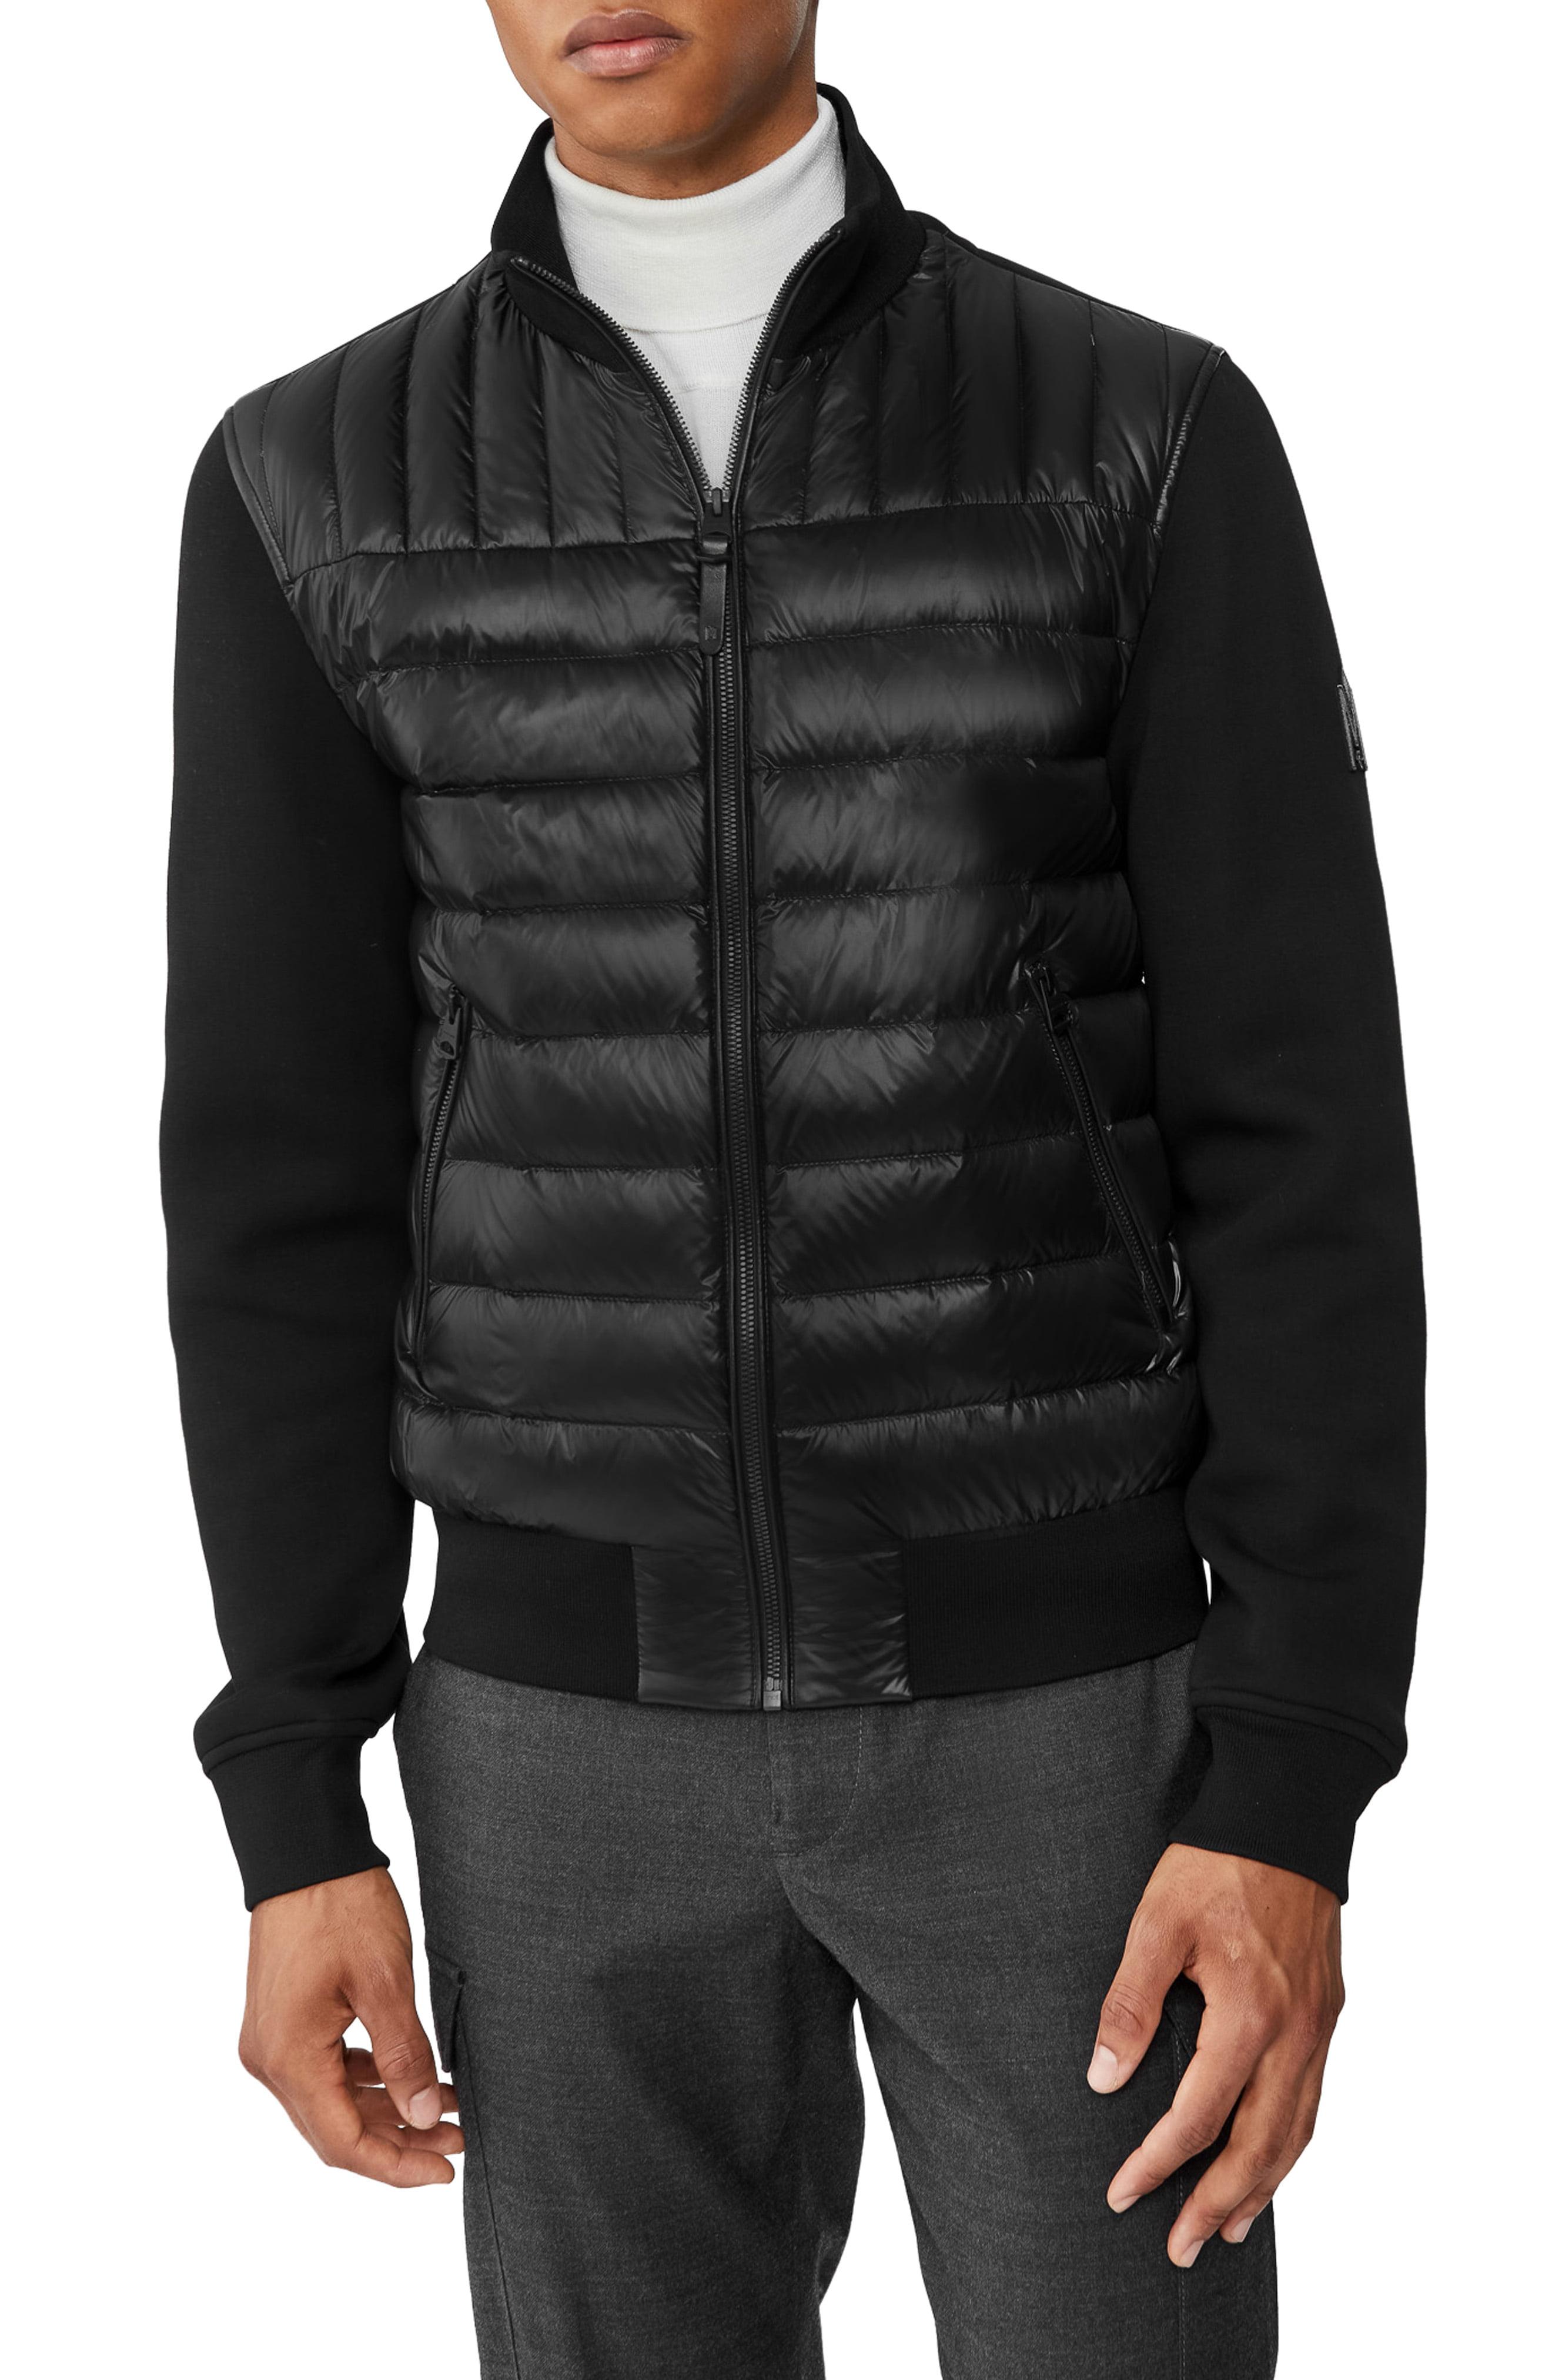 Mackage Cotton Collin Mixed Media Down Jacket in Black for Men - Lyst